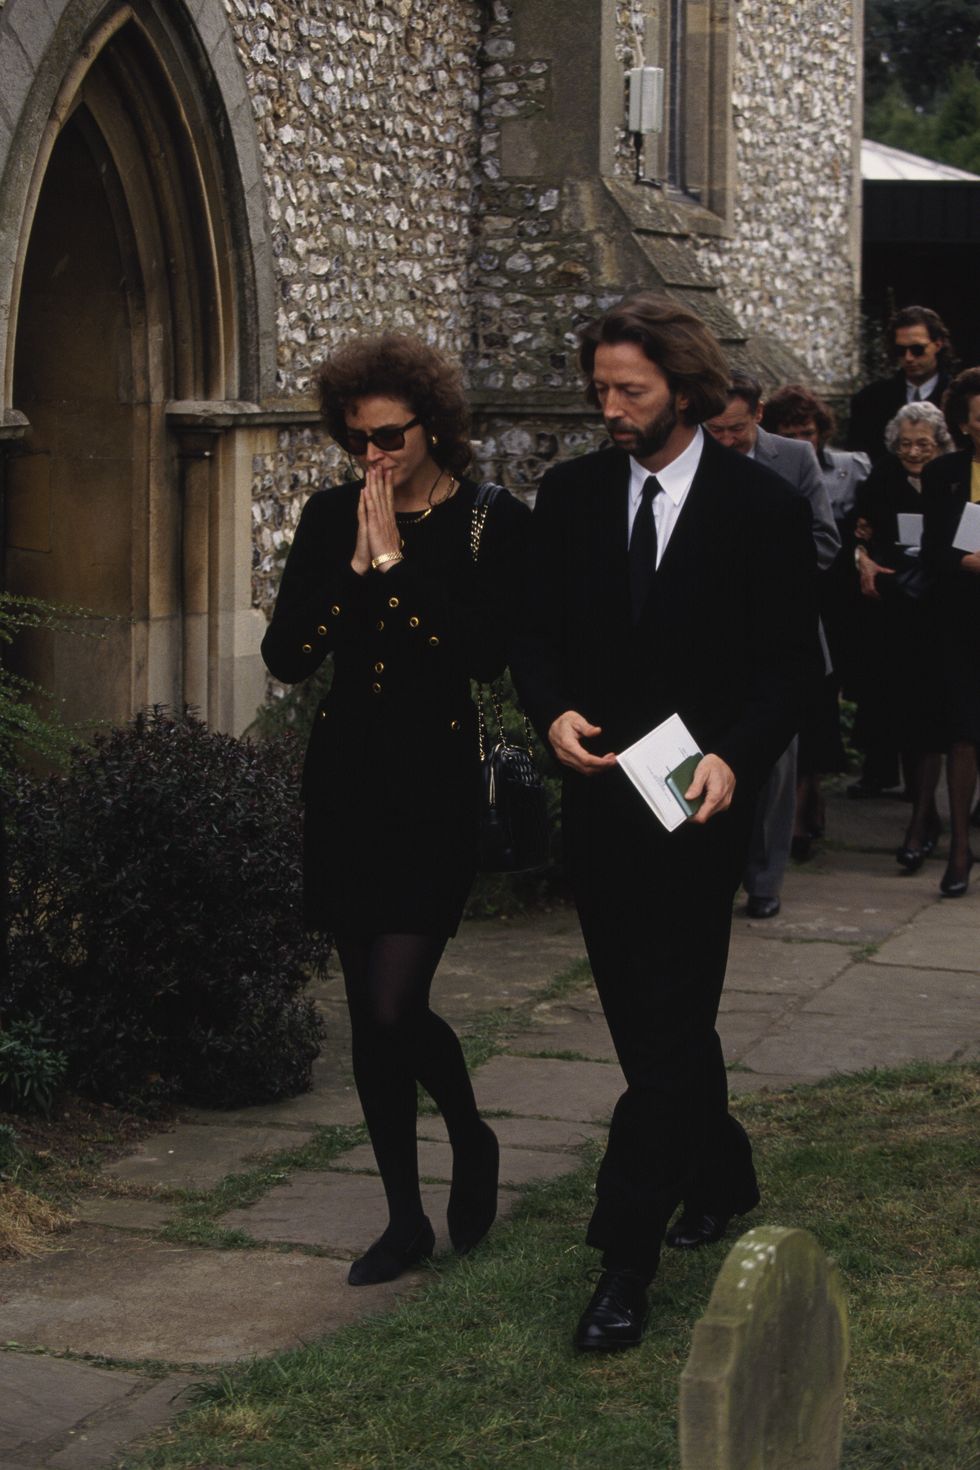 Lory del Santo and Eric Clapton attend the funeral of their son, Conor, in Ripley, United Kingdom